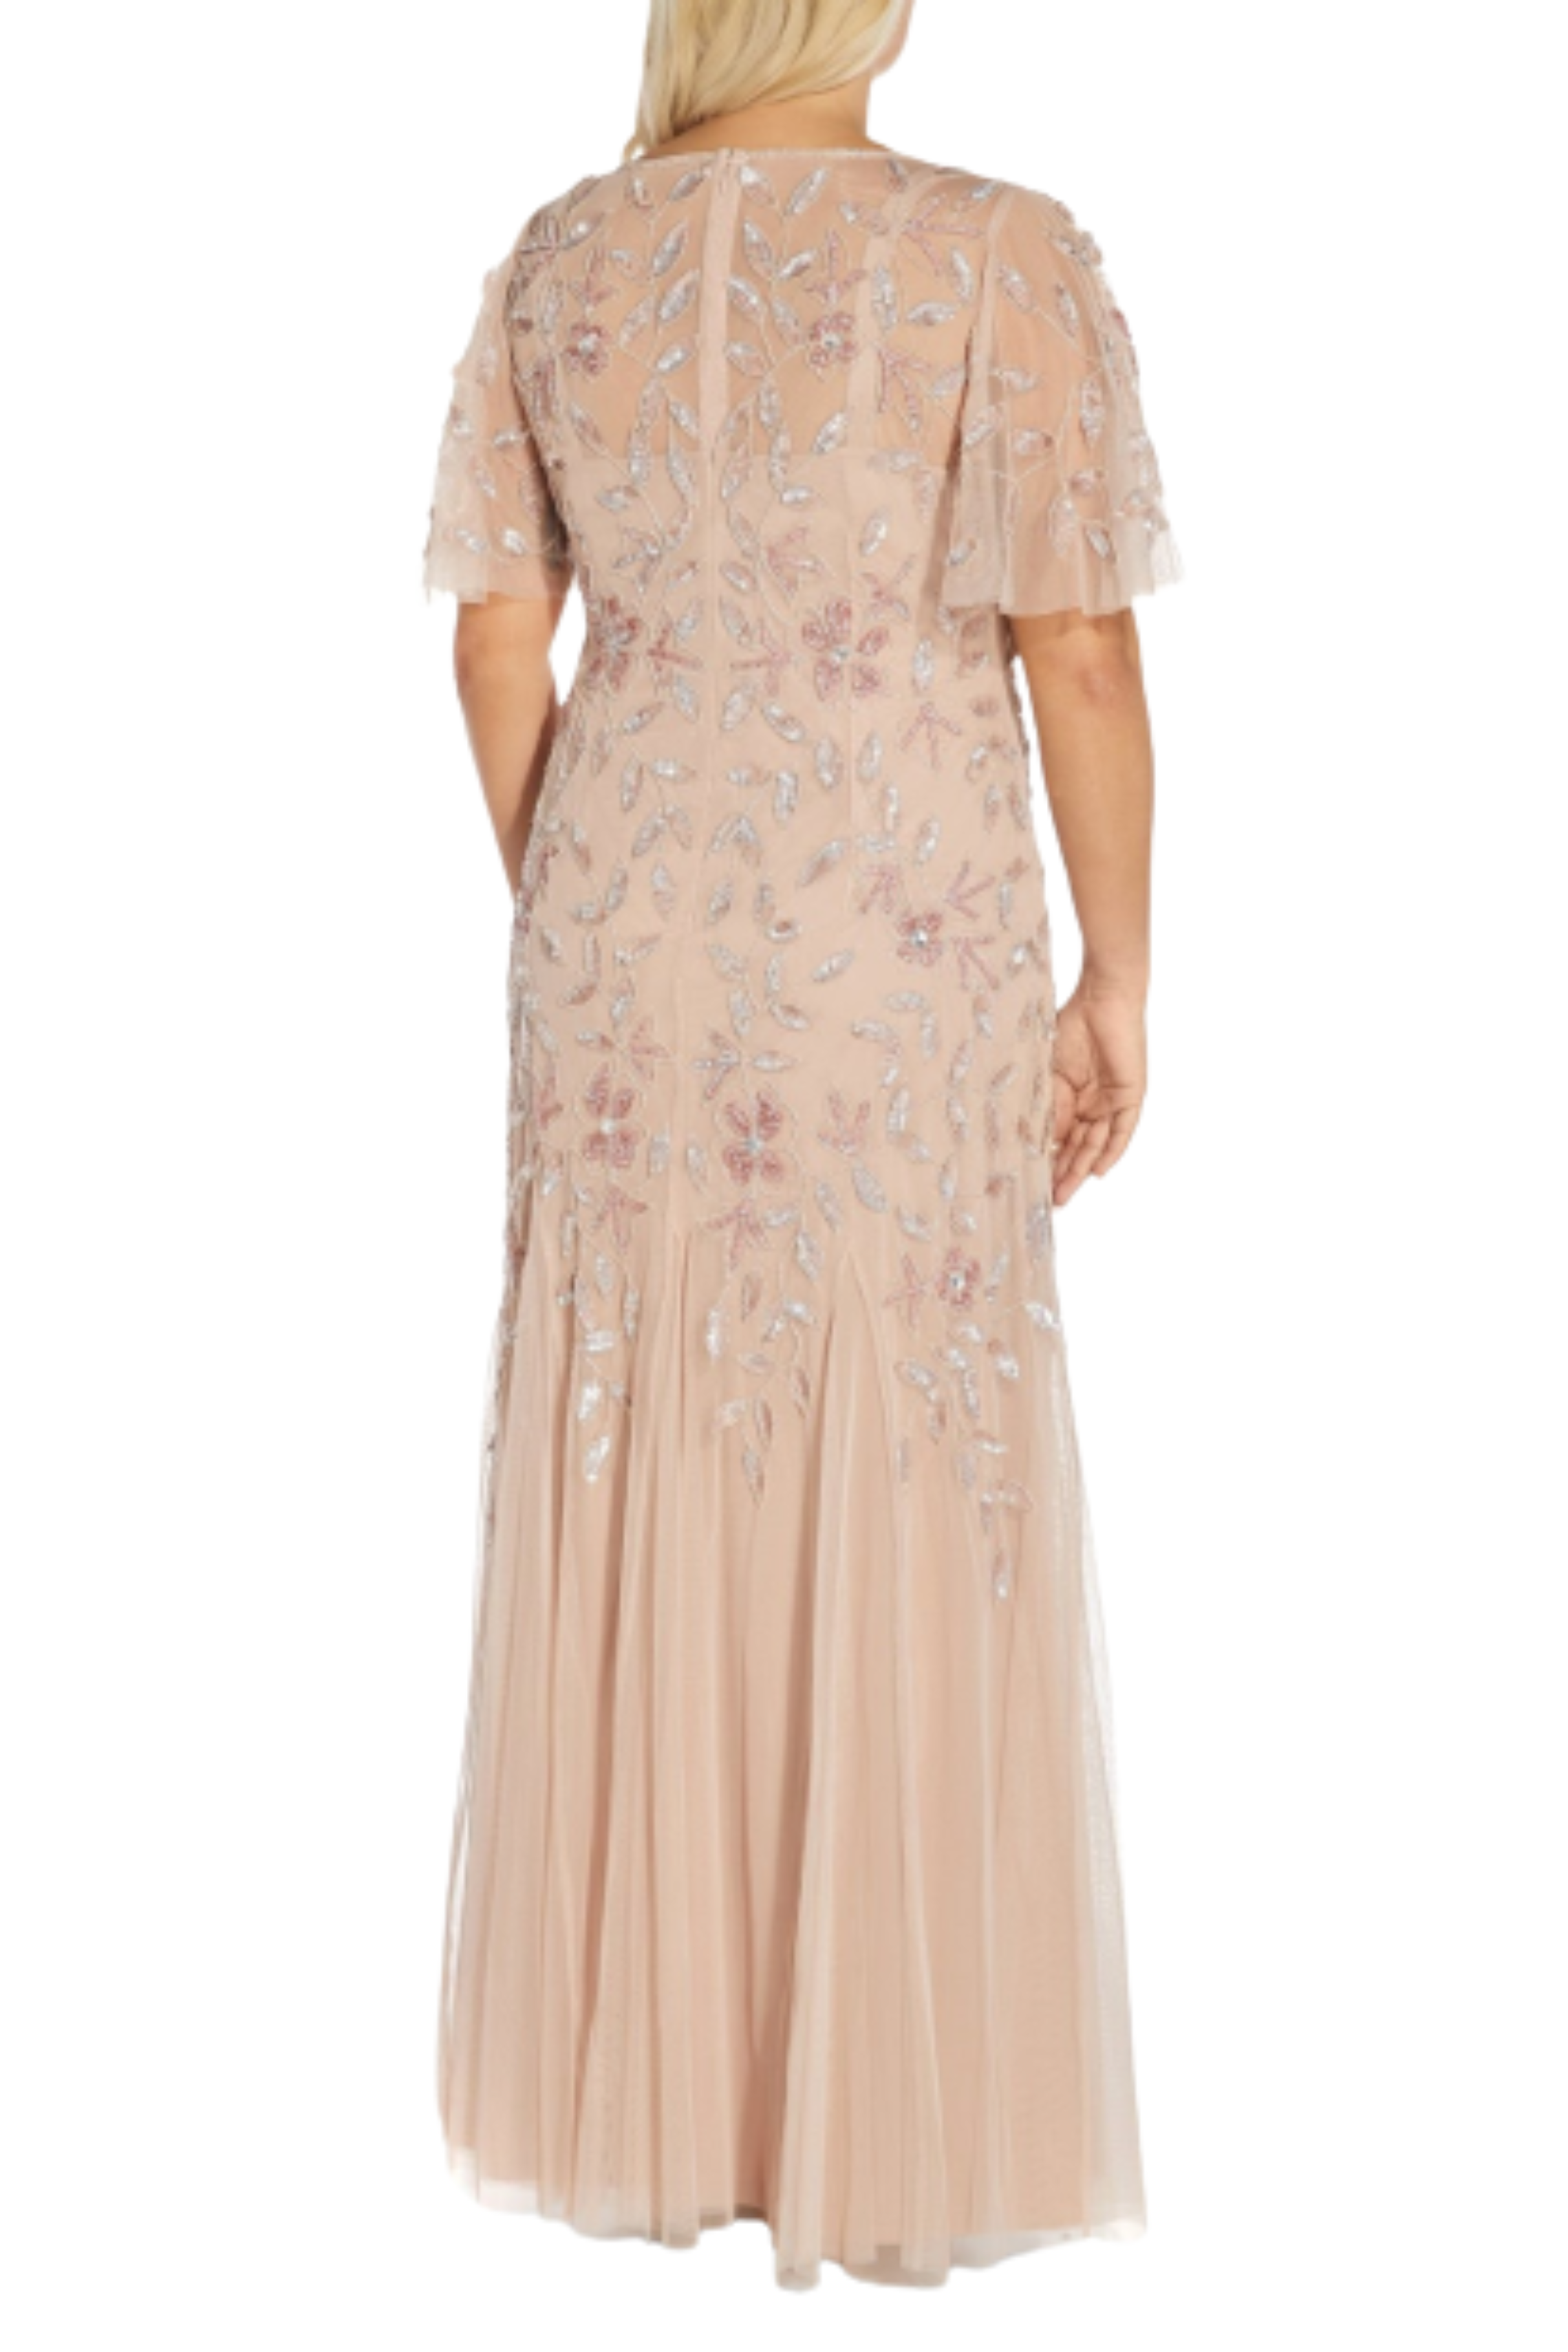 Adrianna Papell Art Deco Beaded Blouson Gown - Taupe Pink - Adinas